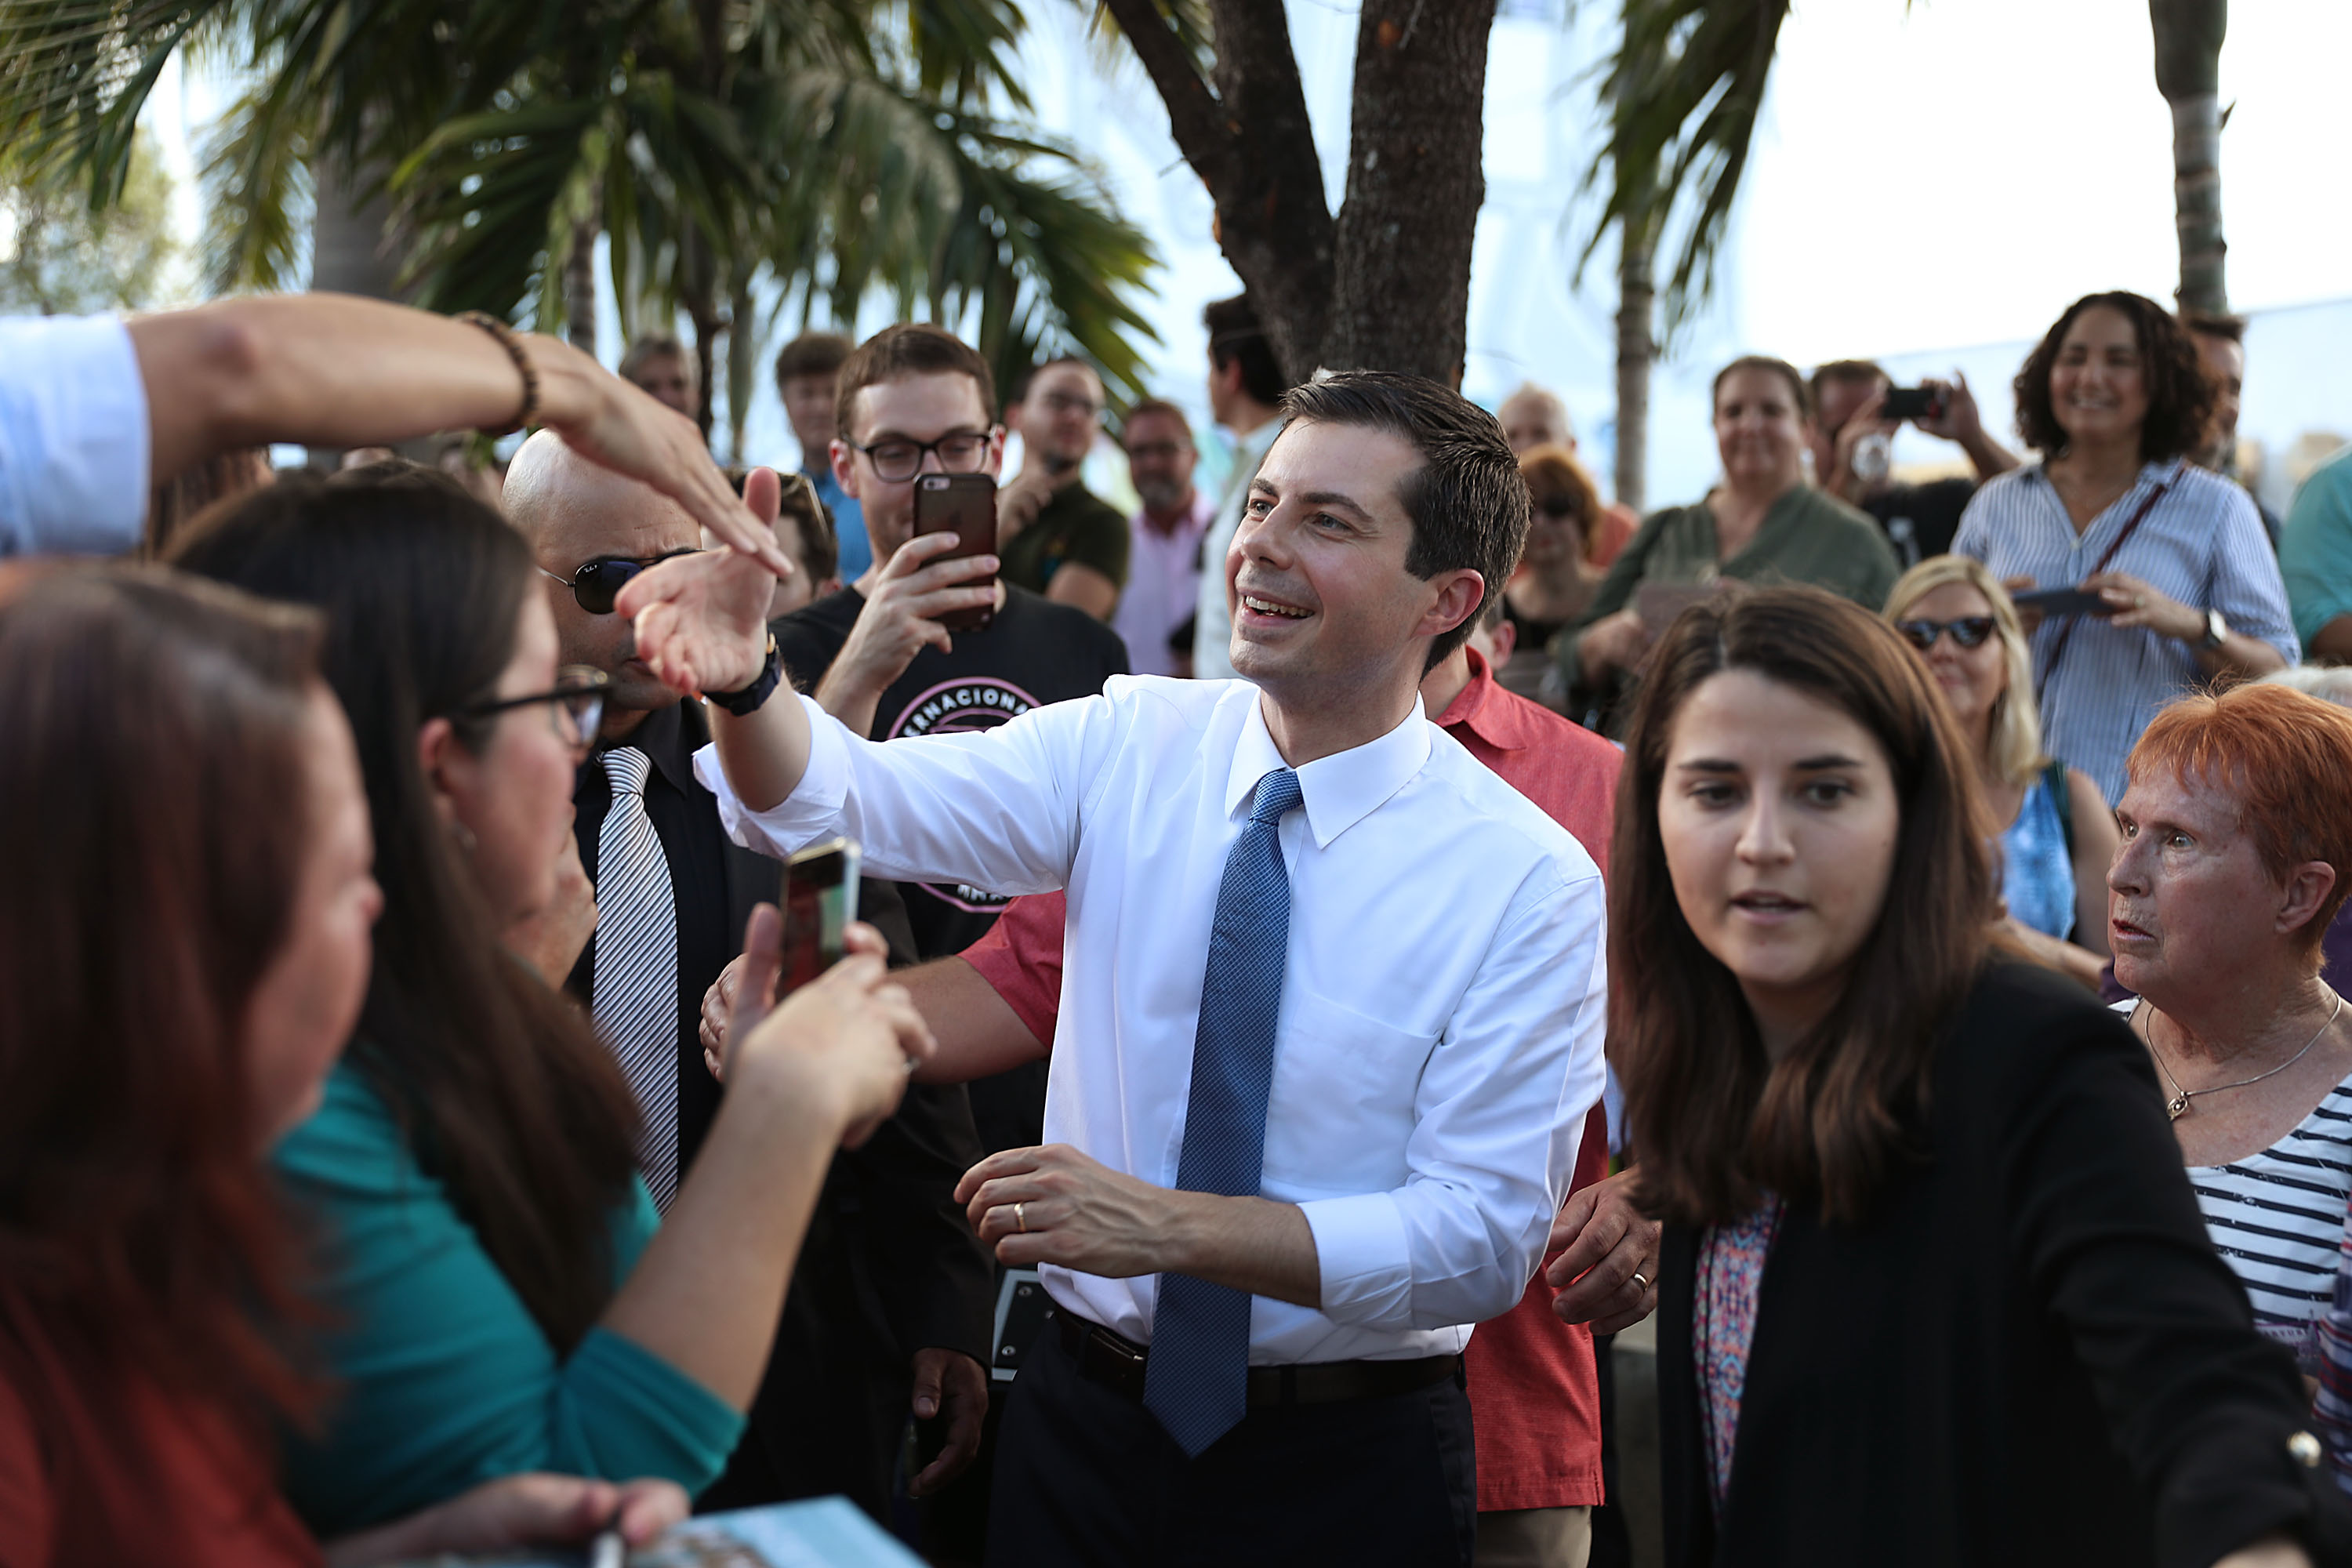 MIAMI, FLORIDA - MAY 20: Democratic presidential candidate and South Bend, Indiana Mayor Pete Buttigieg greets people during a grassroots fundraiser at the Wynwood Walls on May 20, 2019 in Mi